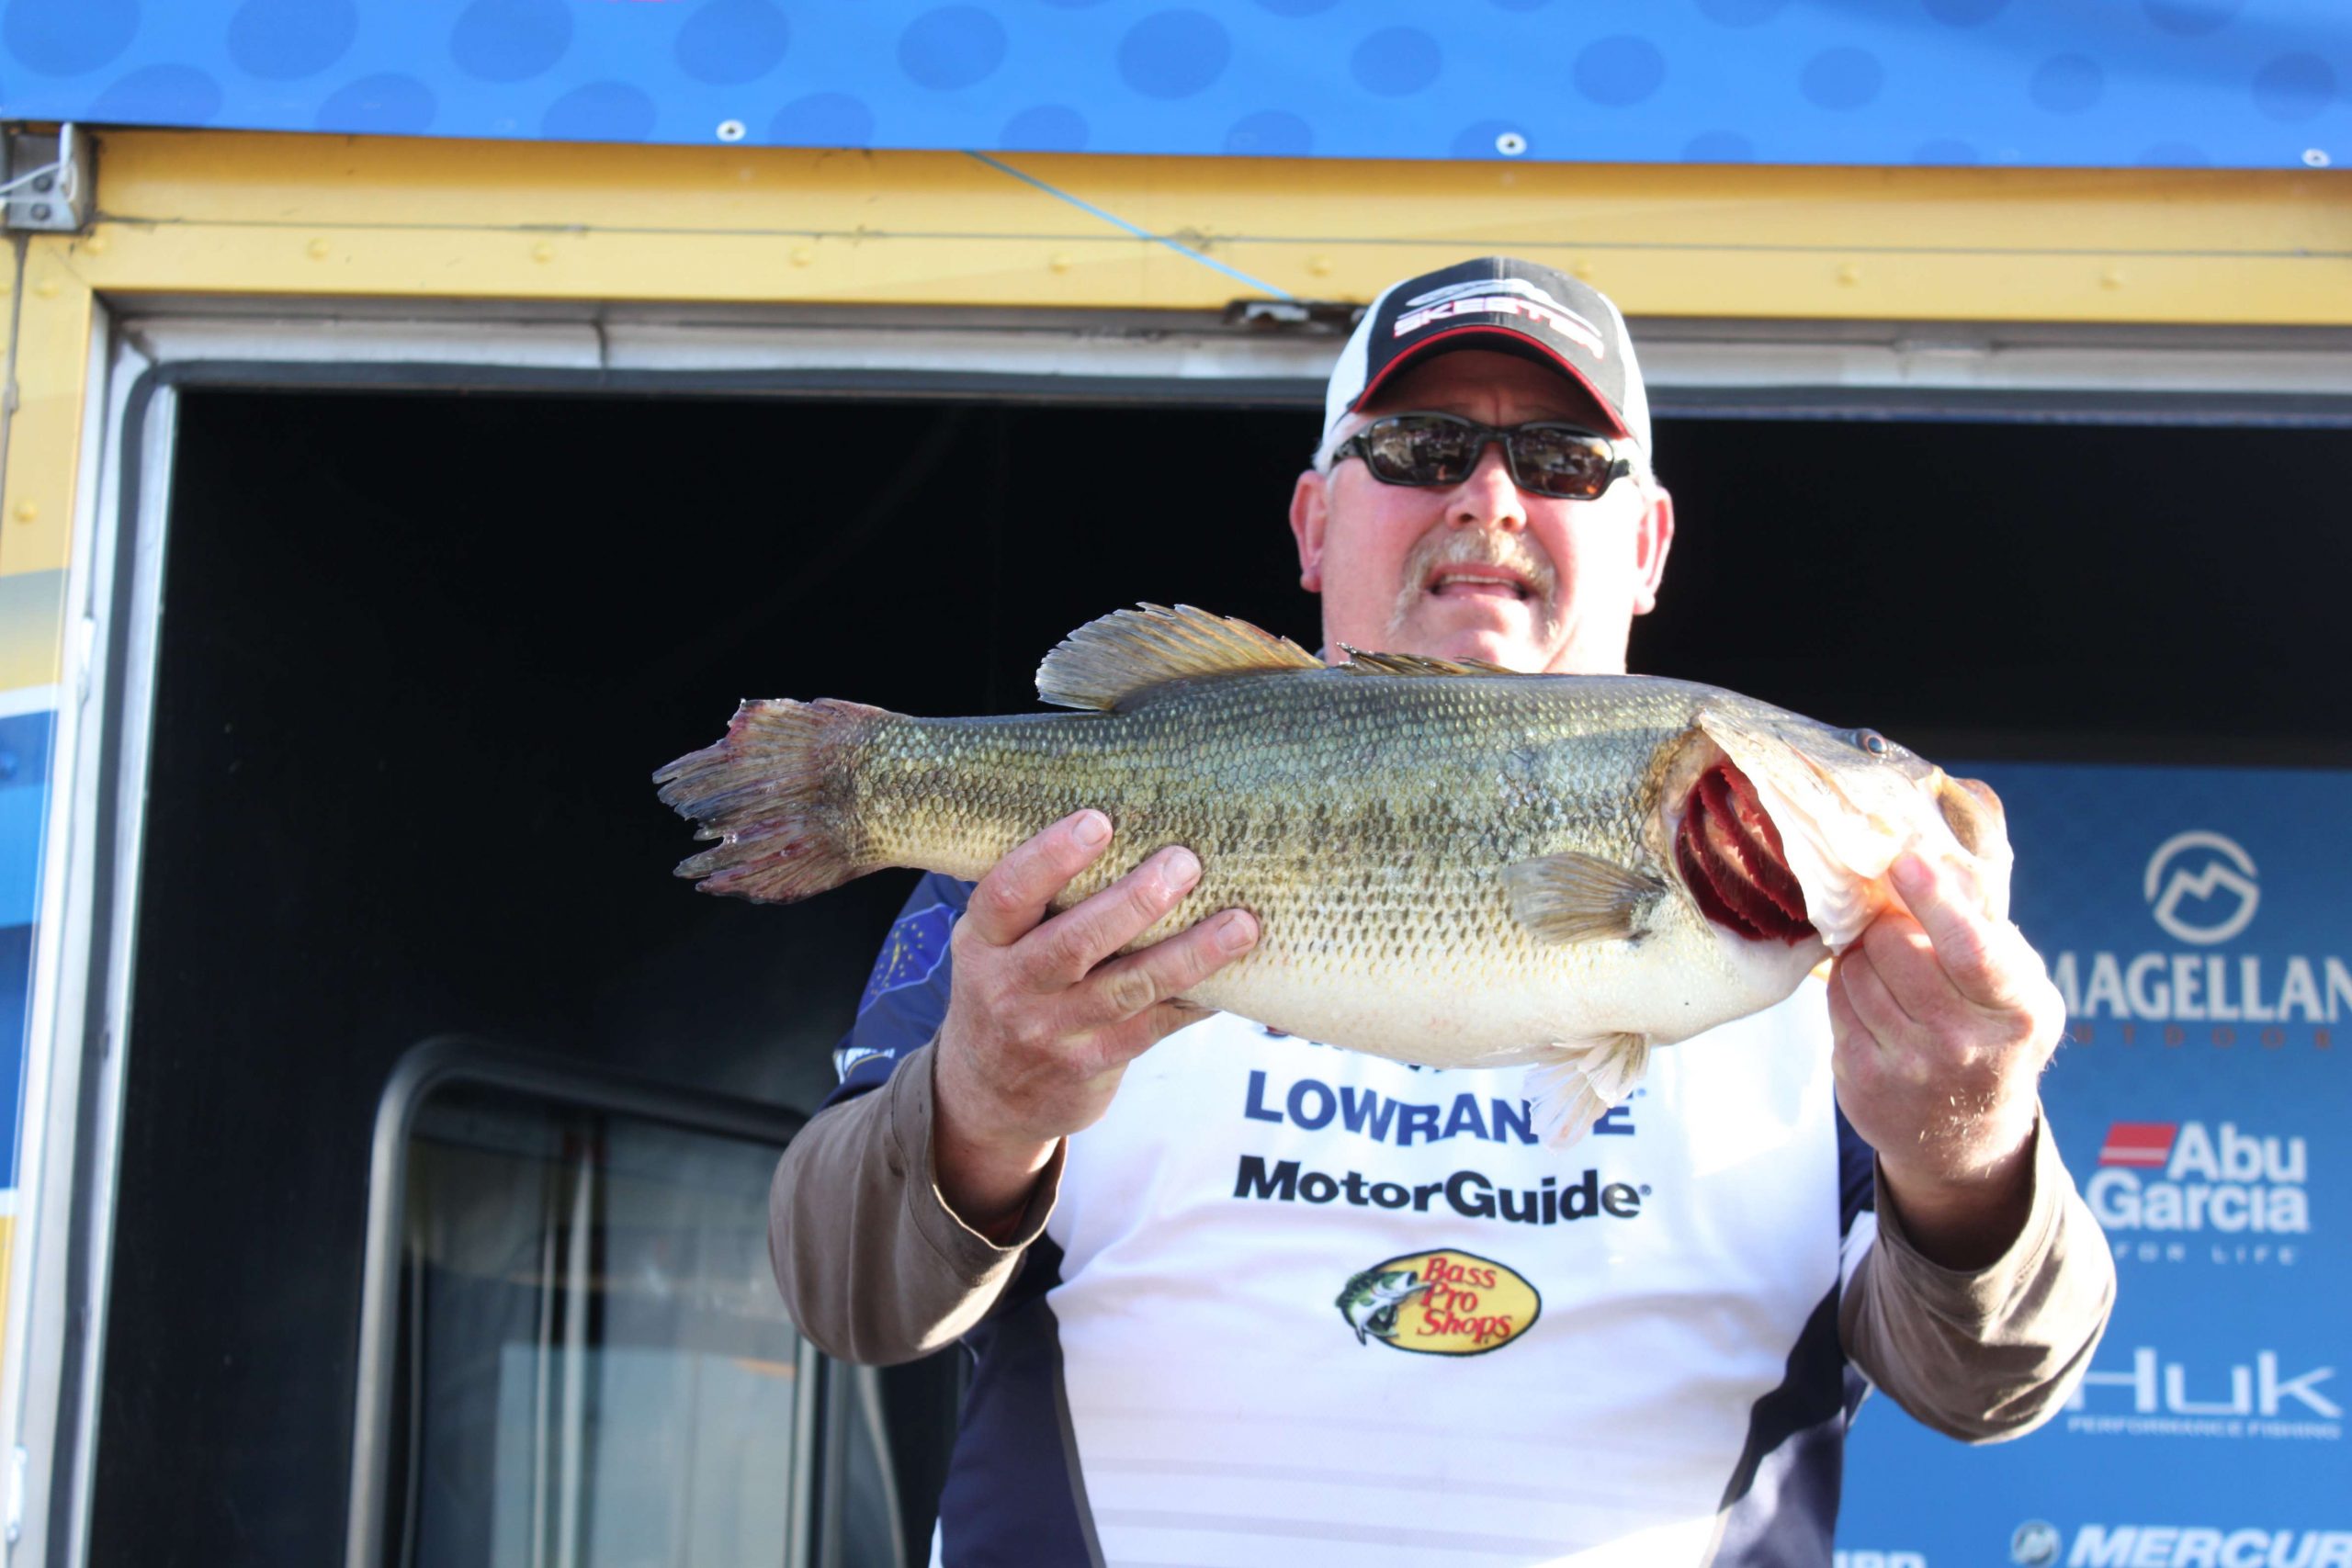 It was a good day for Team Indiana and lunker bass. Here's Gordon Lamb with a 9-3 whopper. It wasn't enough to get him into Friday's cut, but man, what a bass!
